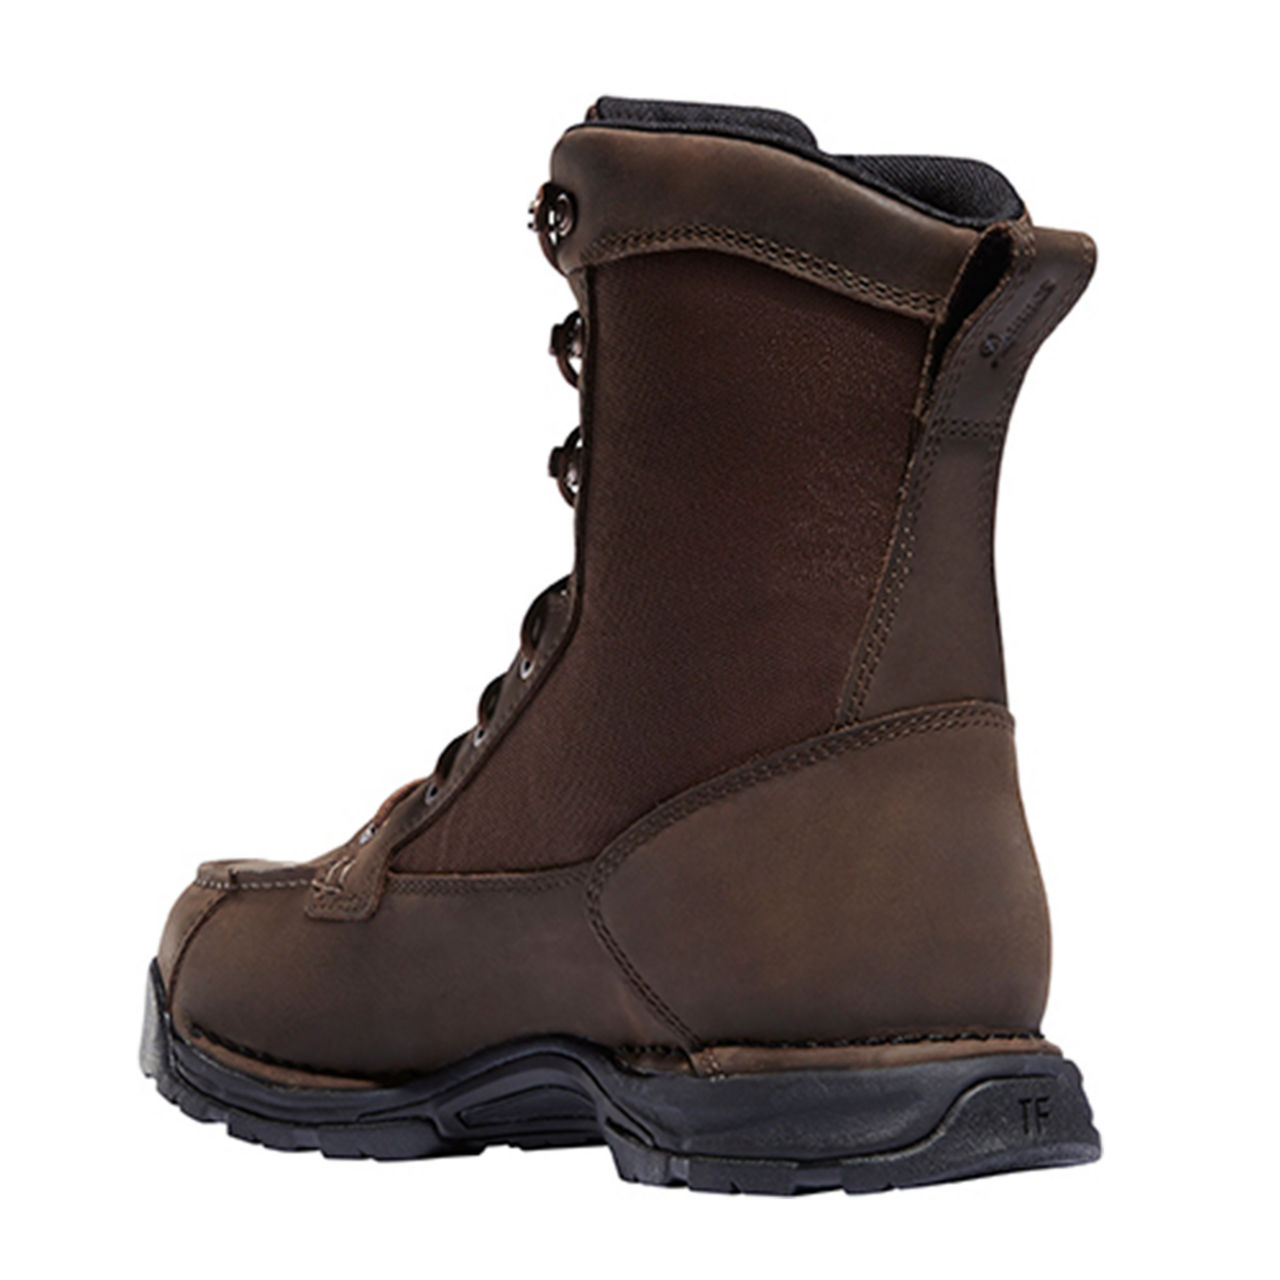 Danner Sharptail 8" GTX Boots - BROWN image number 1